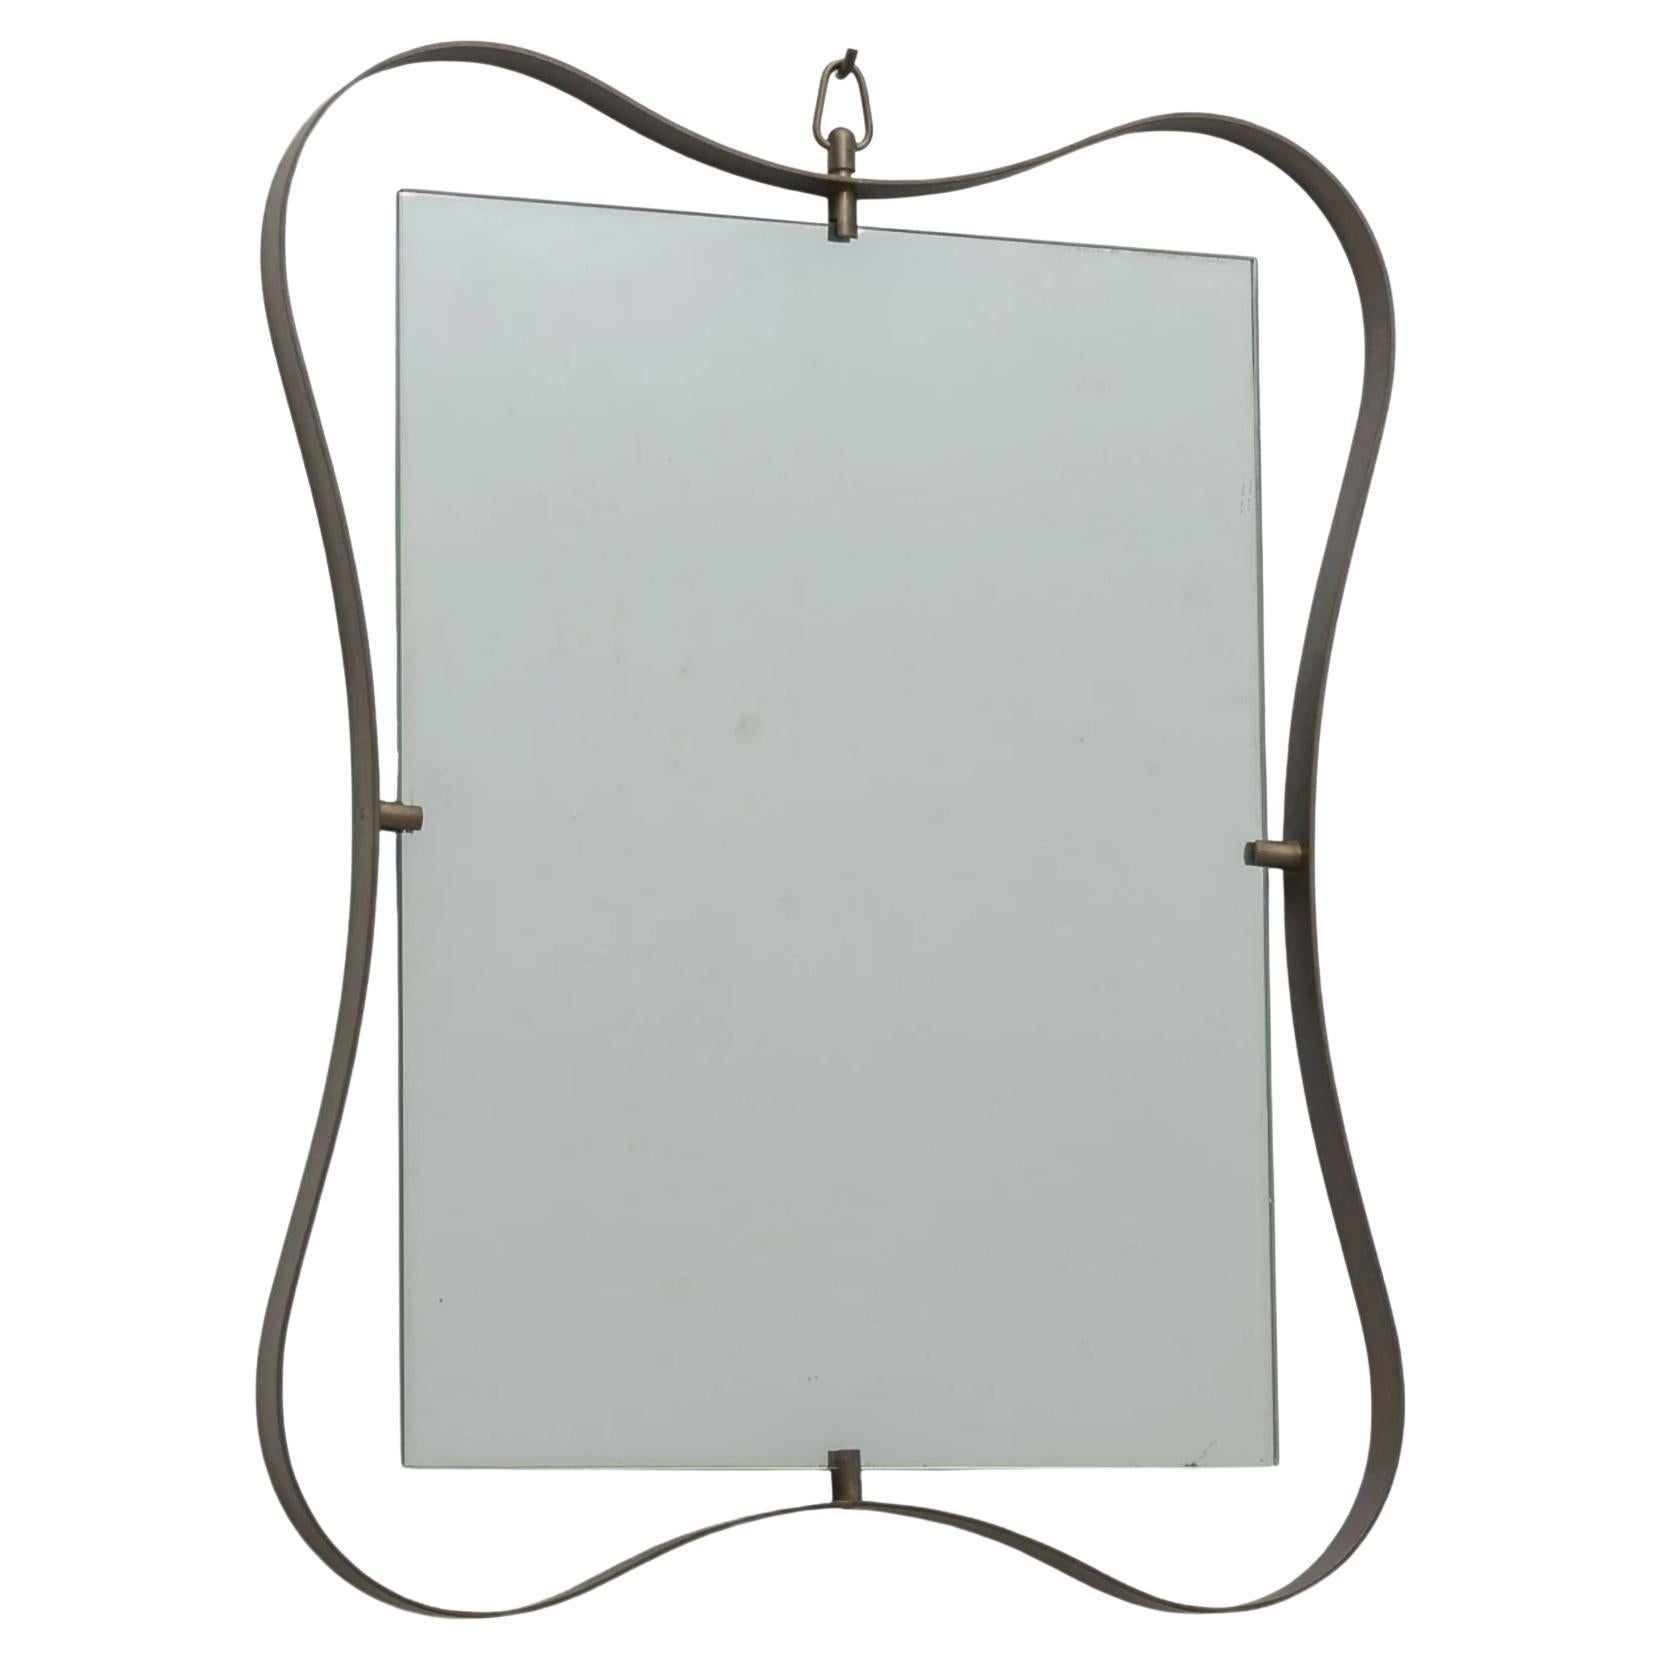 Large Brass Mirror by Fontana Arte, circa 1950

The whimsical brass frame forms a ribbon design fixing a rectangular mirror plate at four points.

A rare piece and the largest of three sizes produced by Fontana Arte.

Published: 'Lastre di vetro e